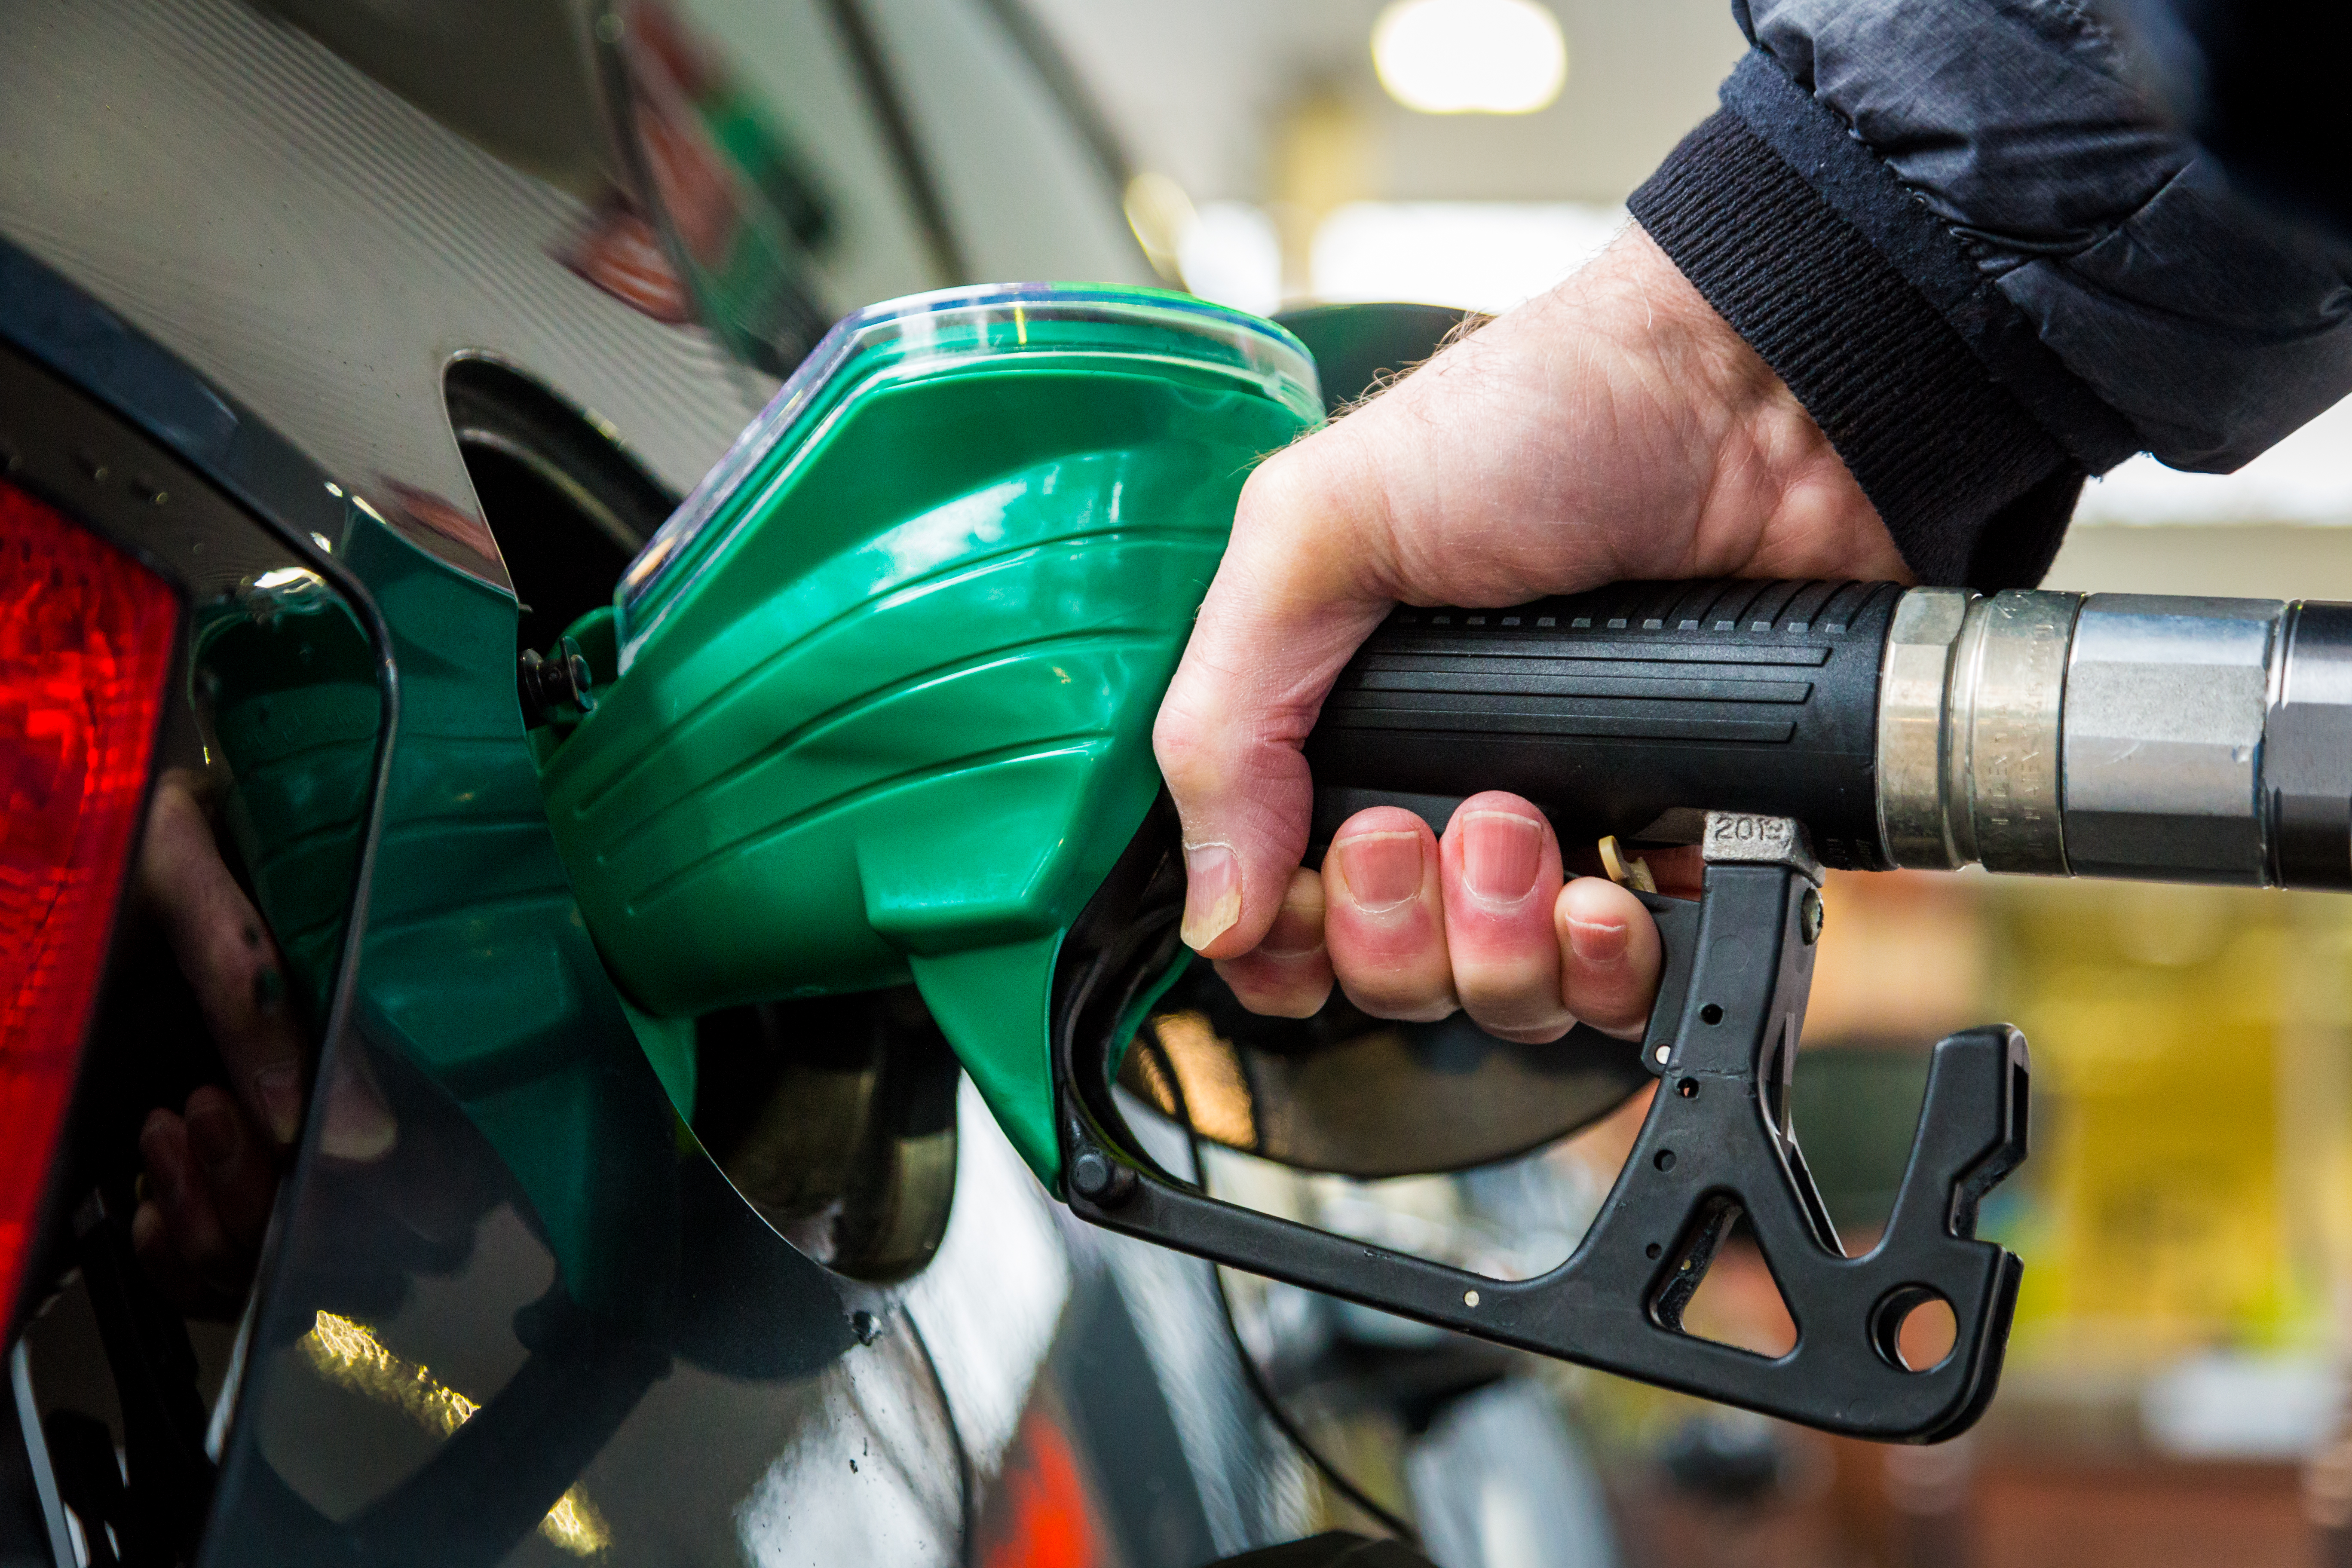 The Competition and Markets Authority has warned that motorists are still being ripped off by high fuel prices